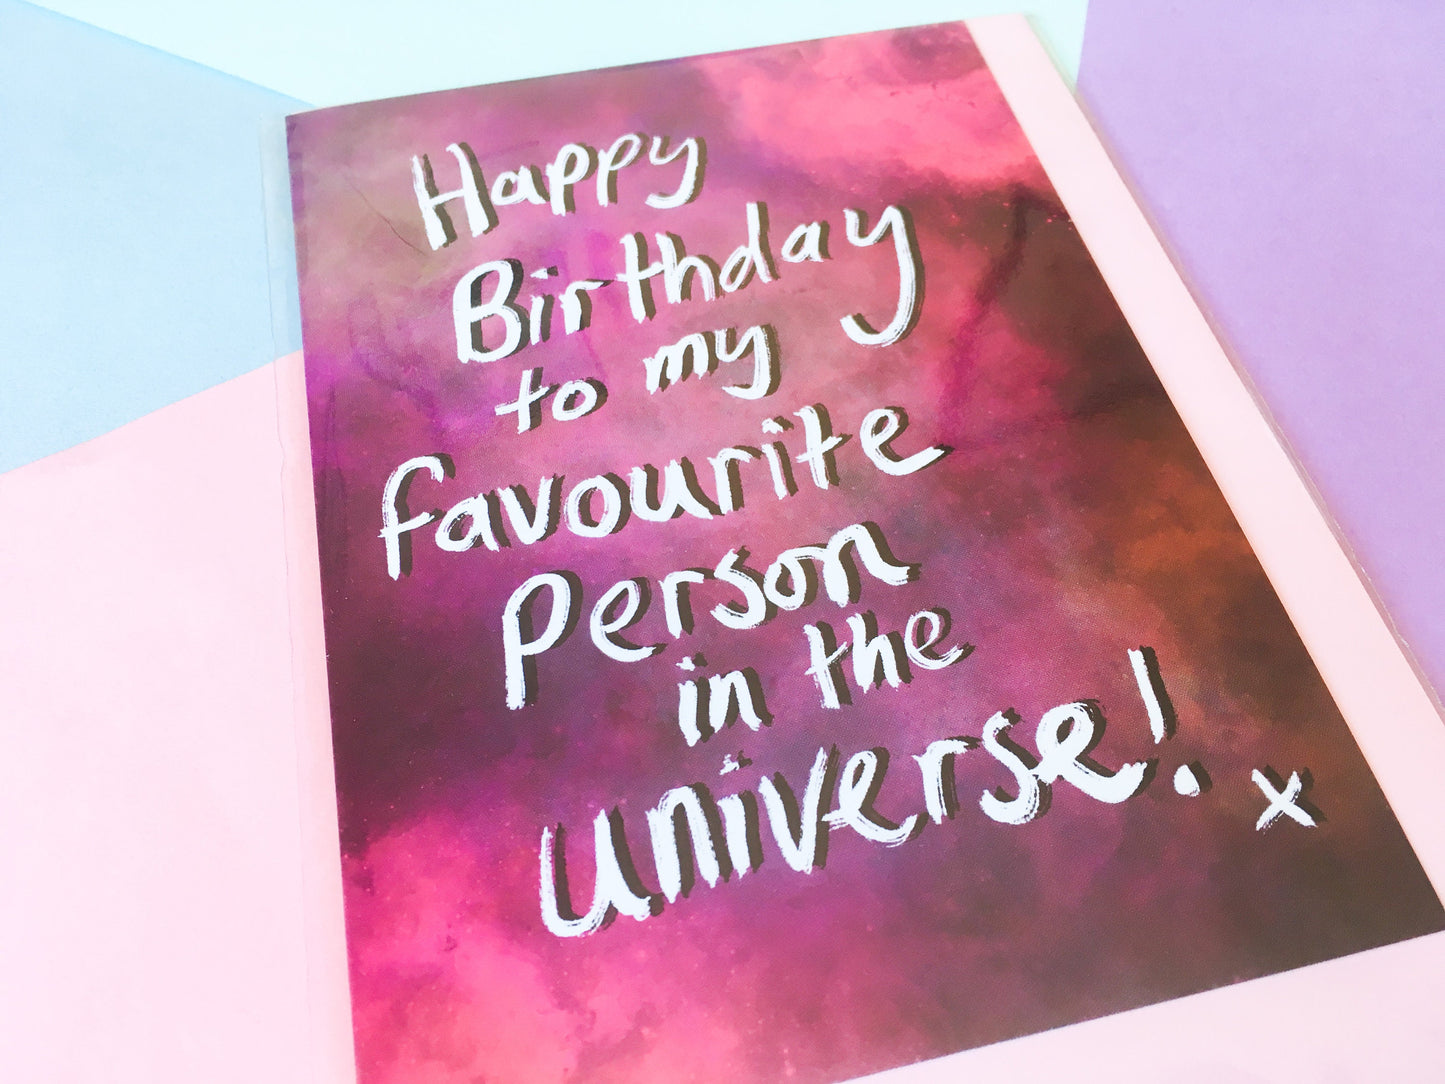 Happy Birthday Card, Favourite Person in the Universe